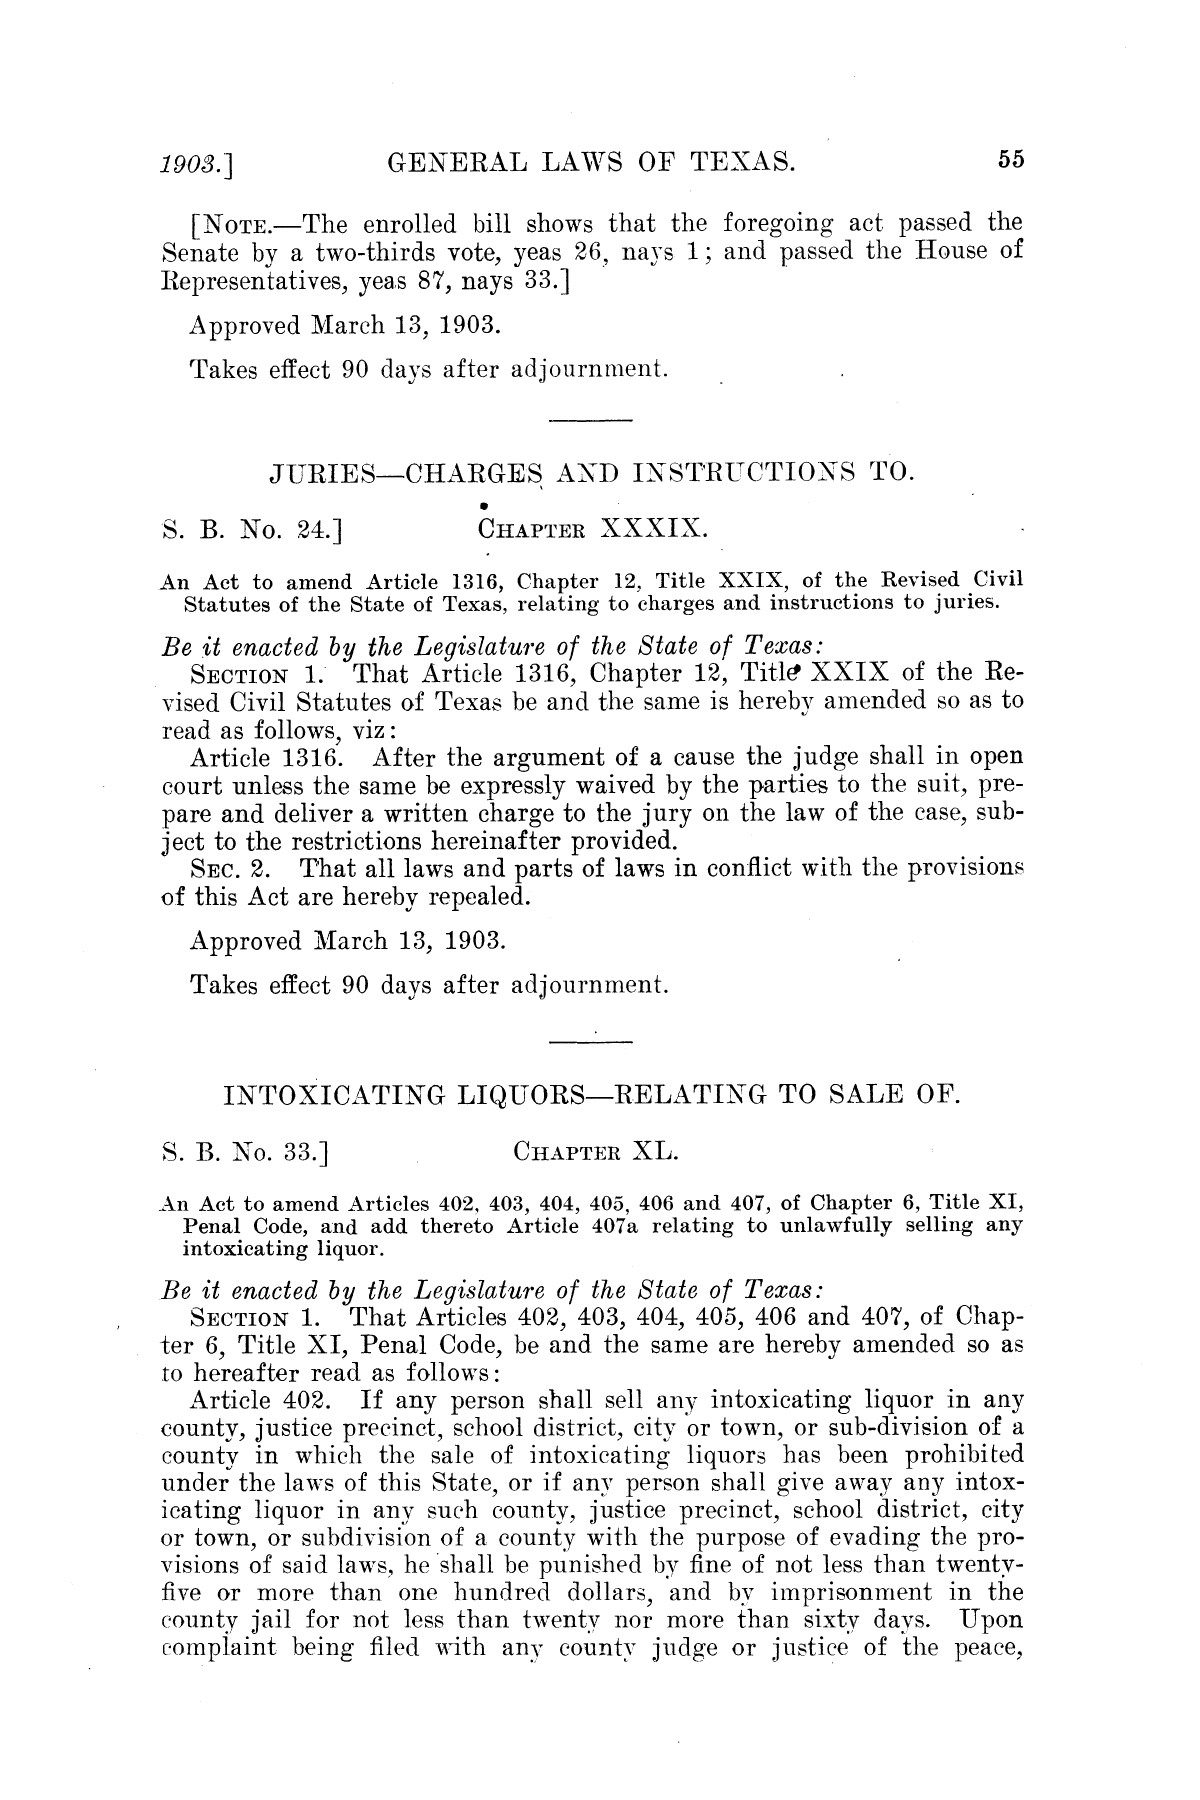 The Laws of Texas, 1903-1905 [Volume 12]
                                                
                                                    [Sequence #]: 85 of 1968
                                                